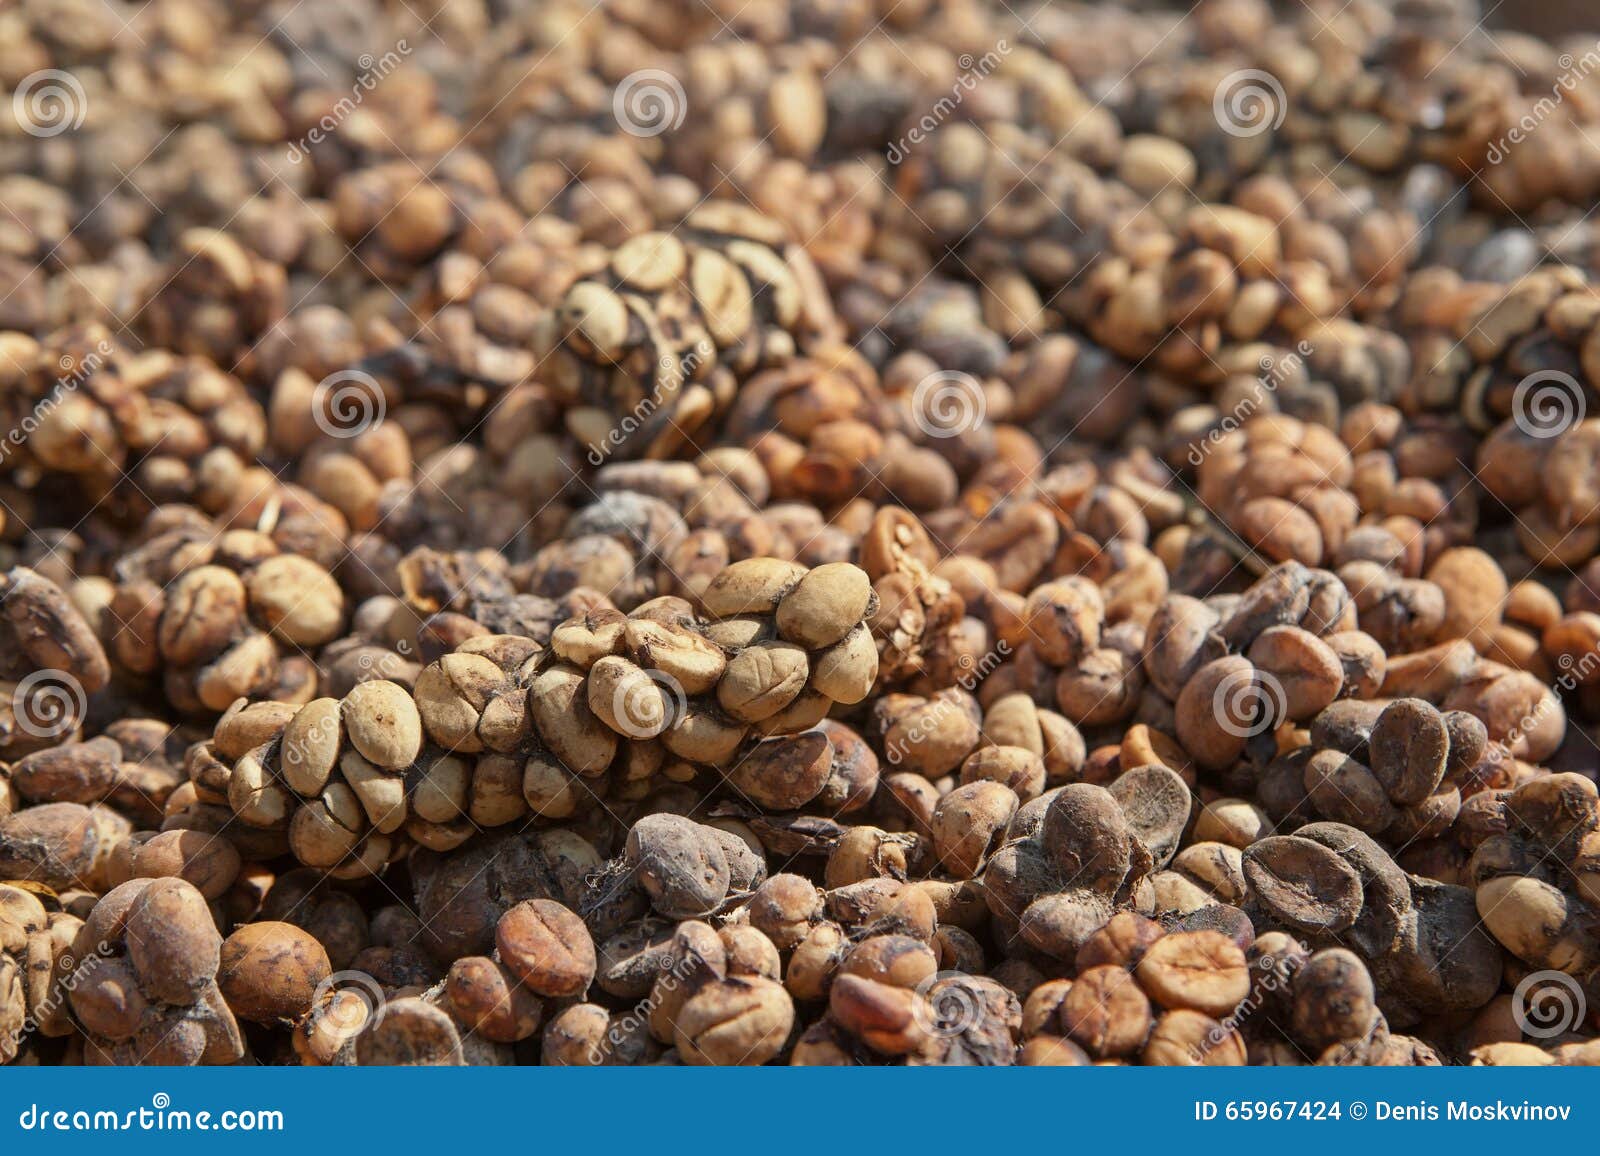 asian palm civet luwak feces with coffee beans